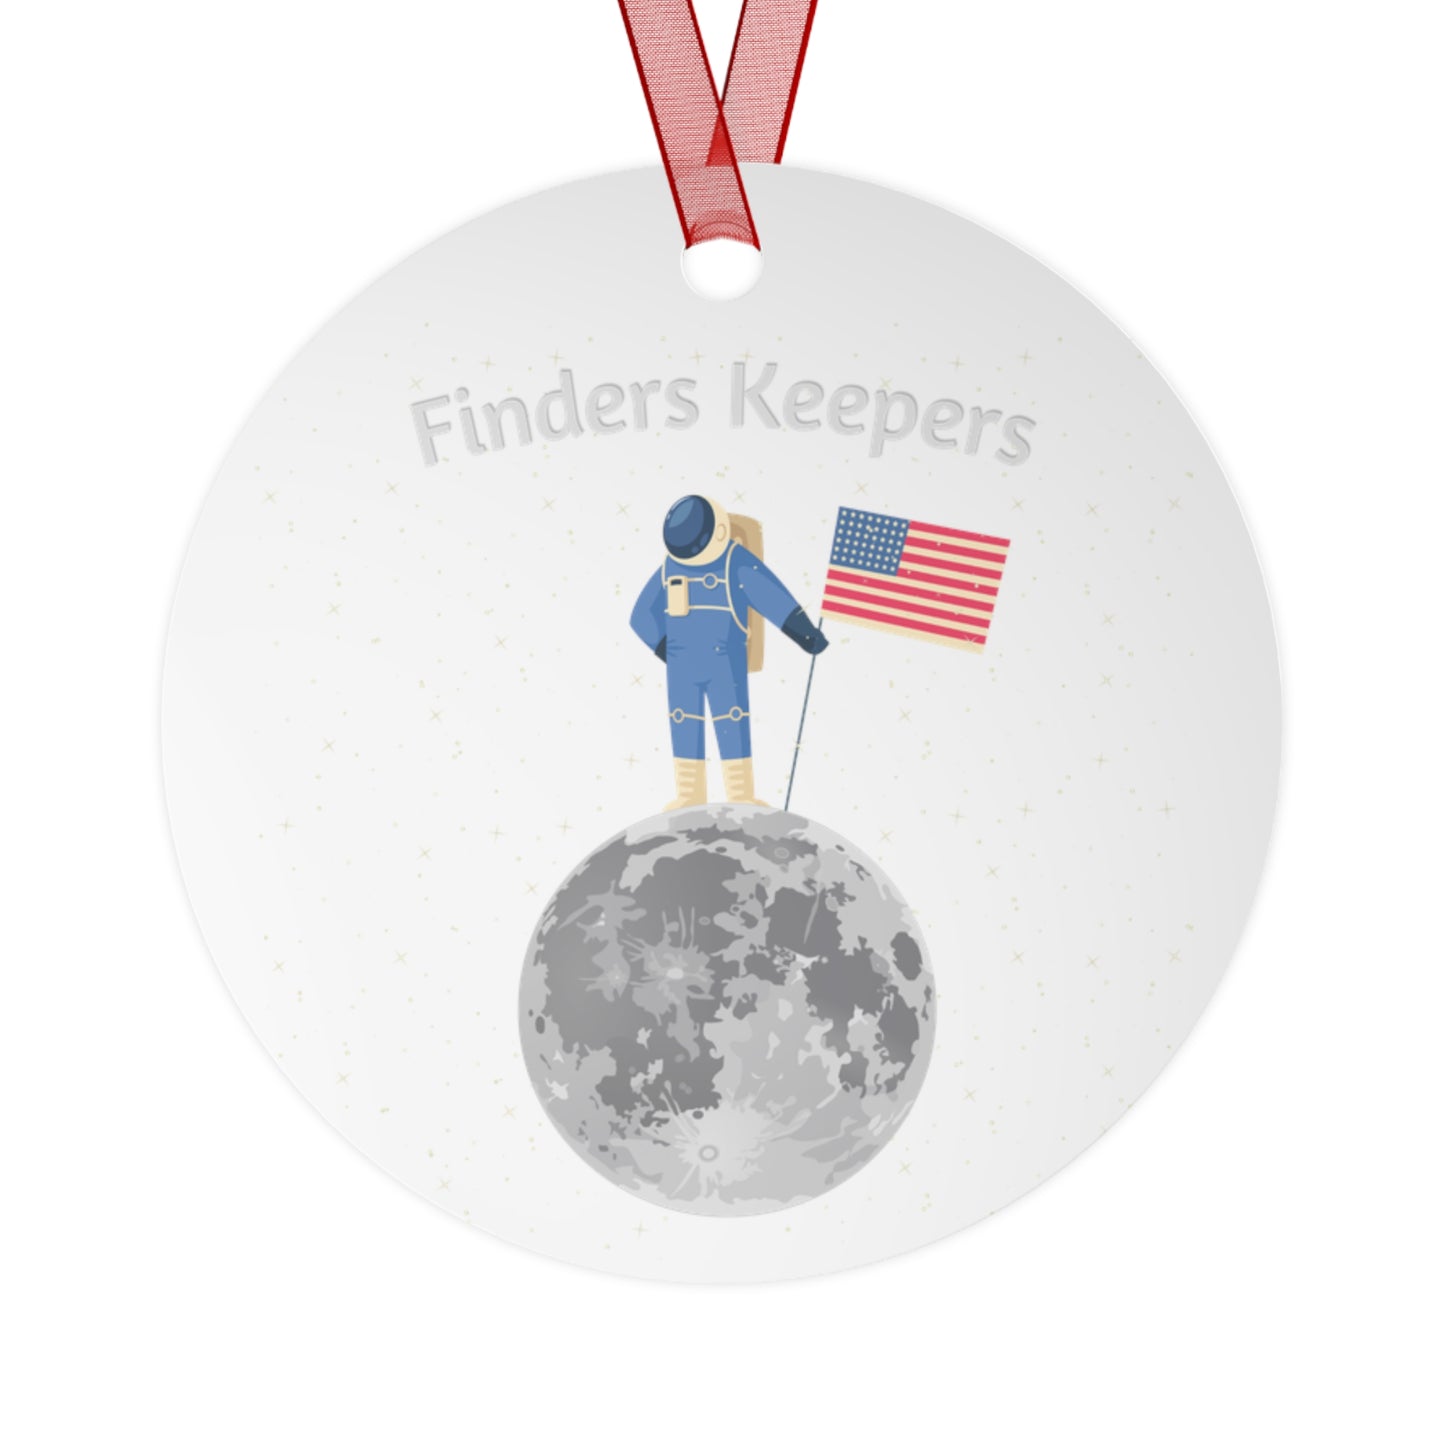 "Finders Keepers" Metal Ornament - Weave Got Gifts - Unique Gifts You Won’t Find Anywhere Else!